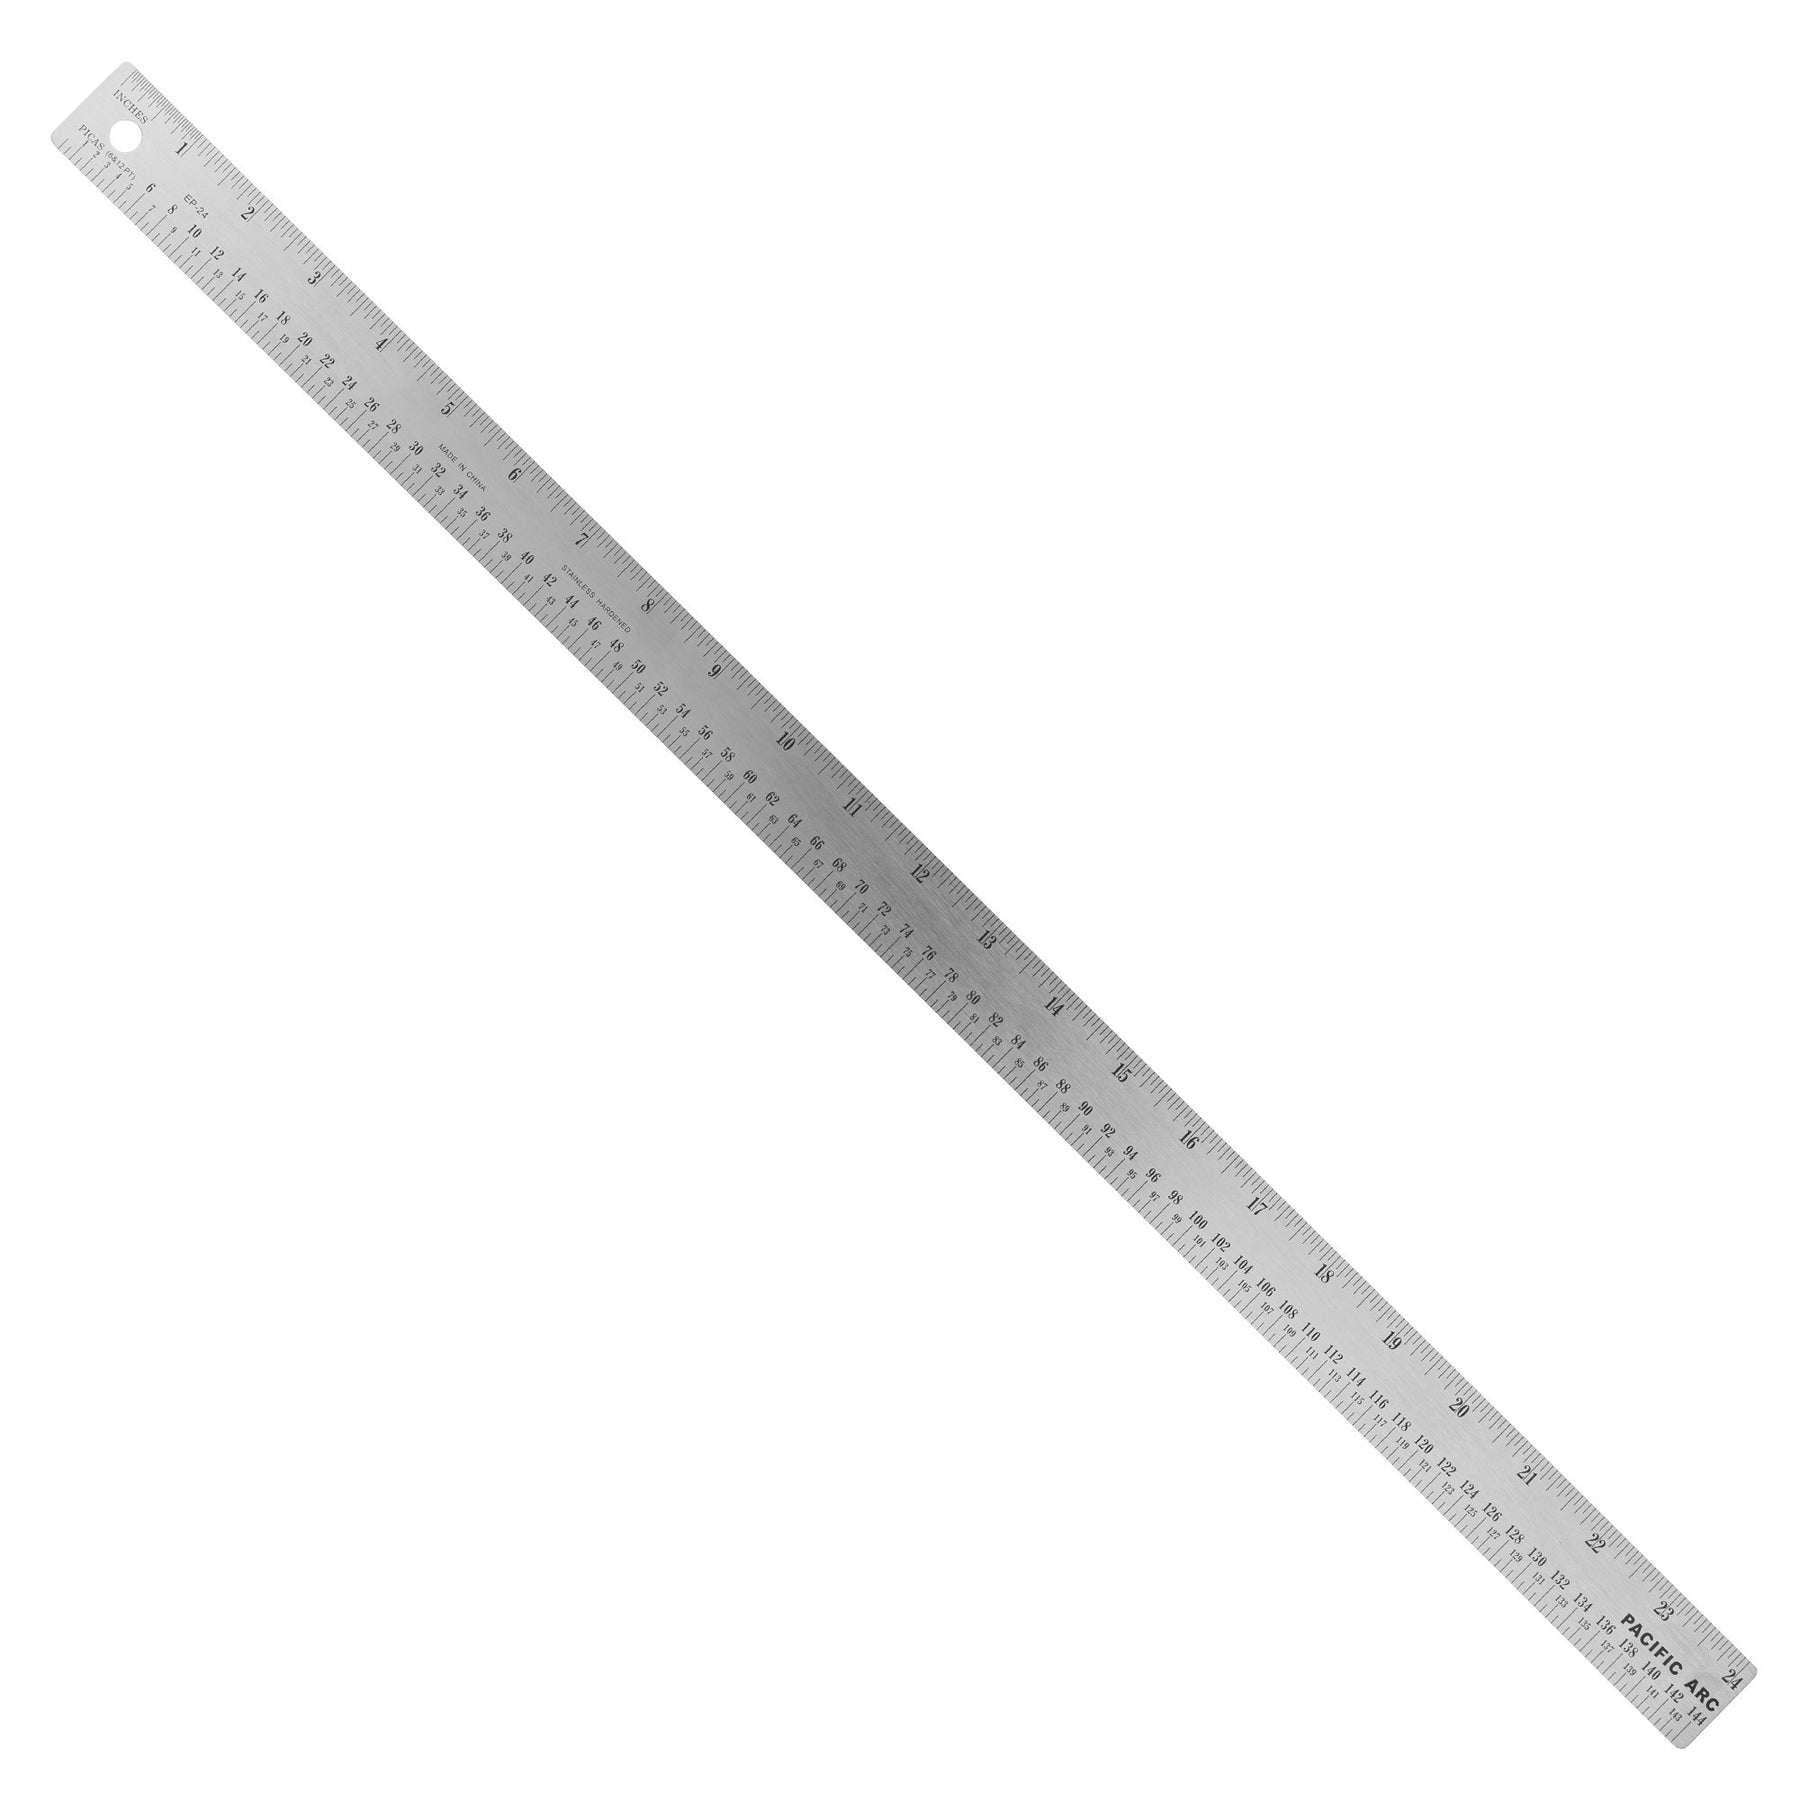 Pacific Arc, Stainless Steel Ruler with Inch (32nd & 64th) and Pica, Non Skid Cork or Rubber Back